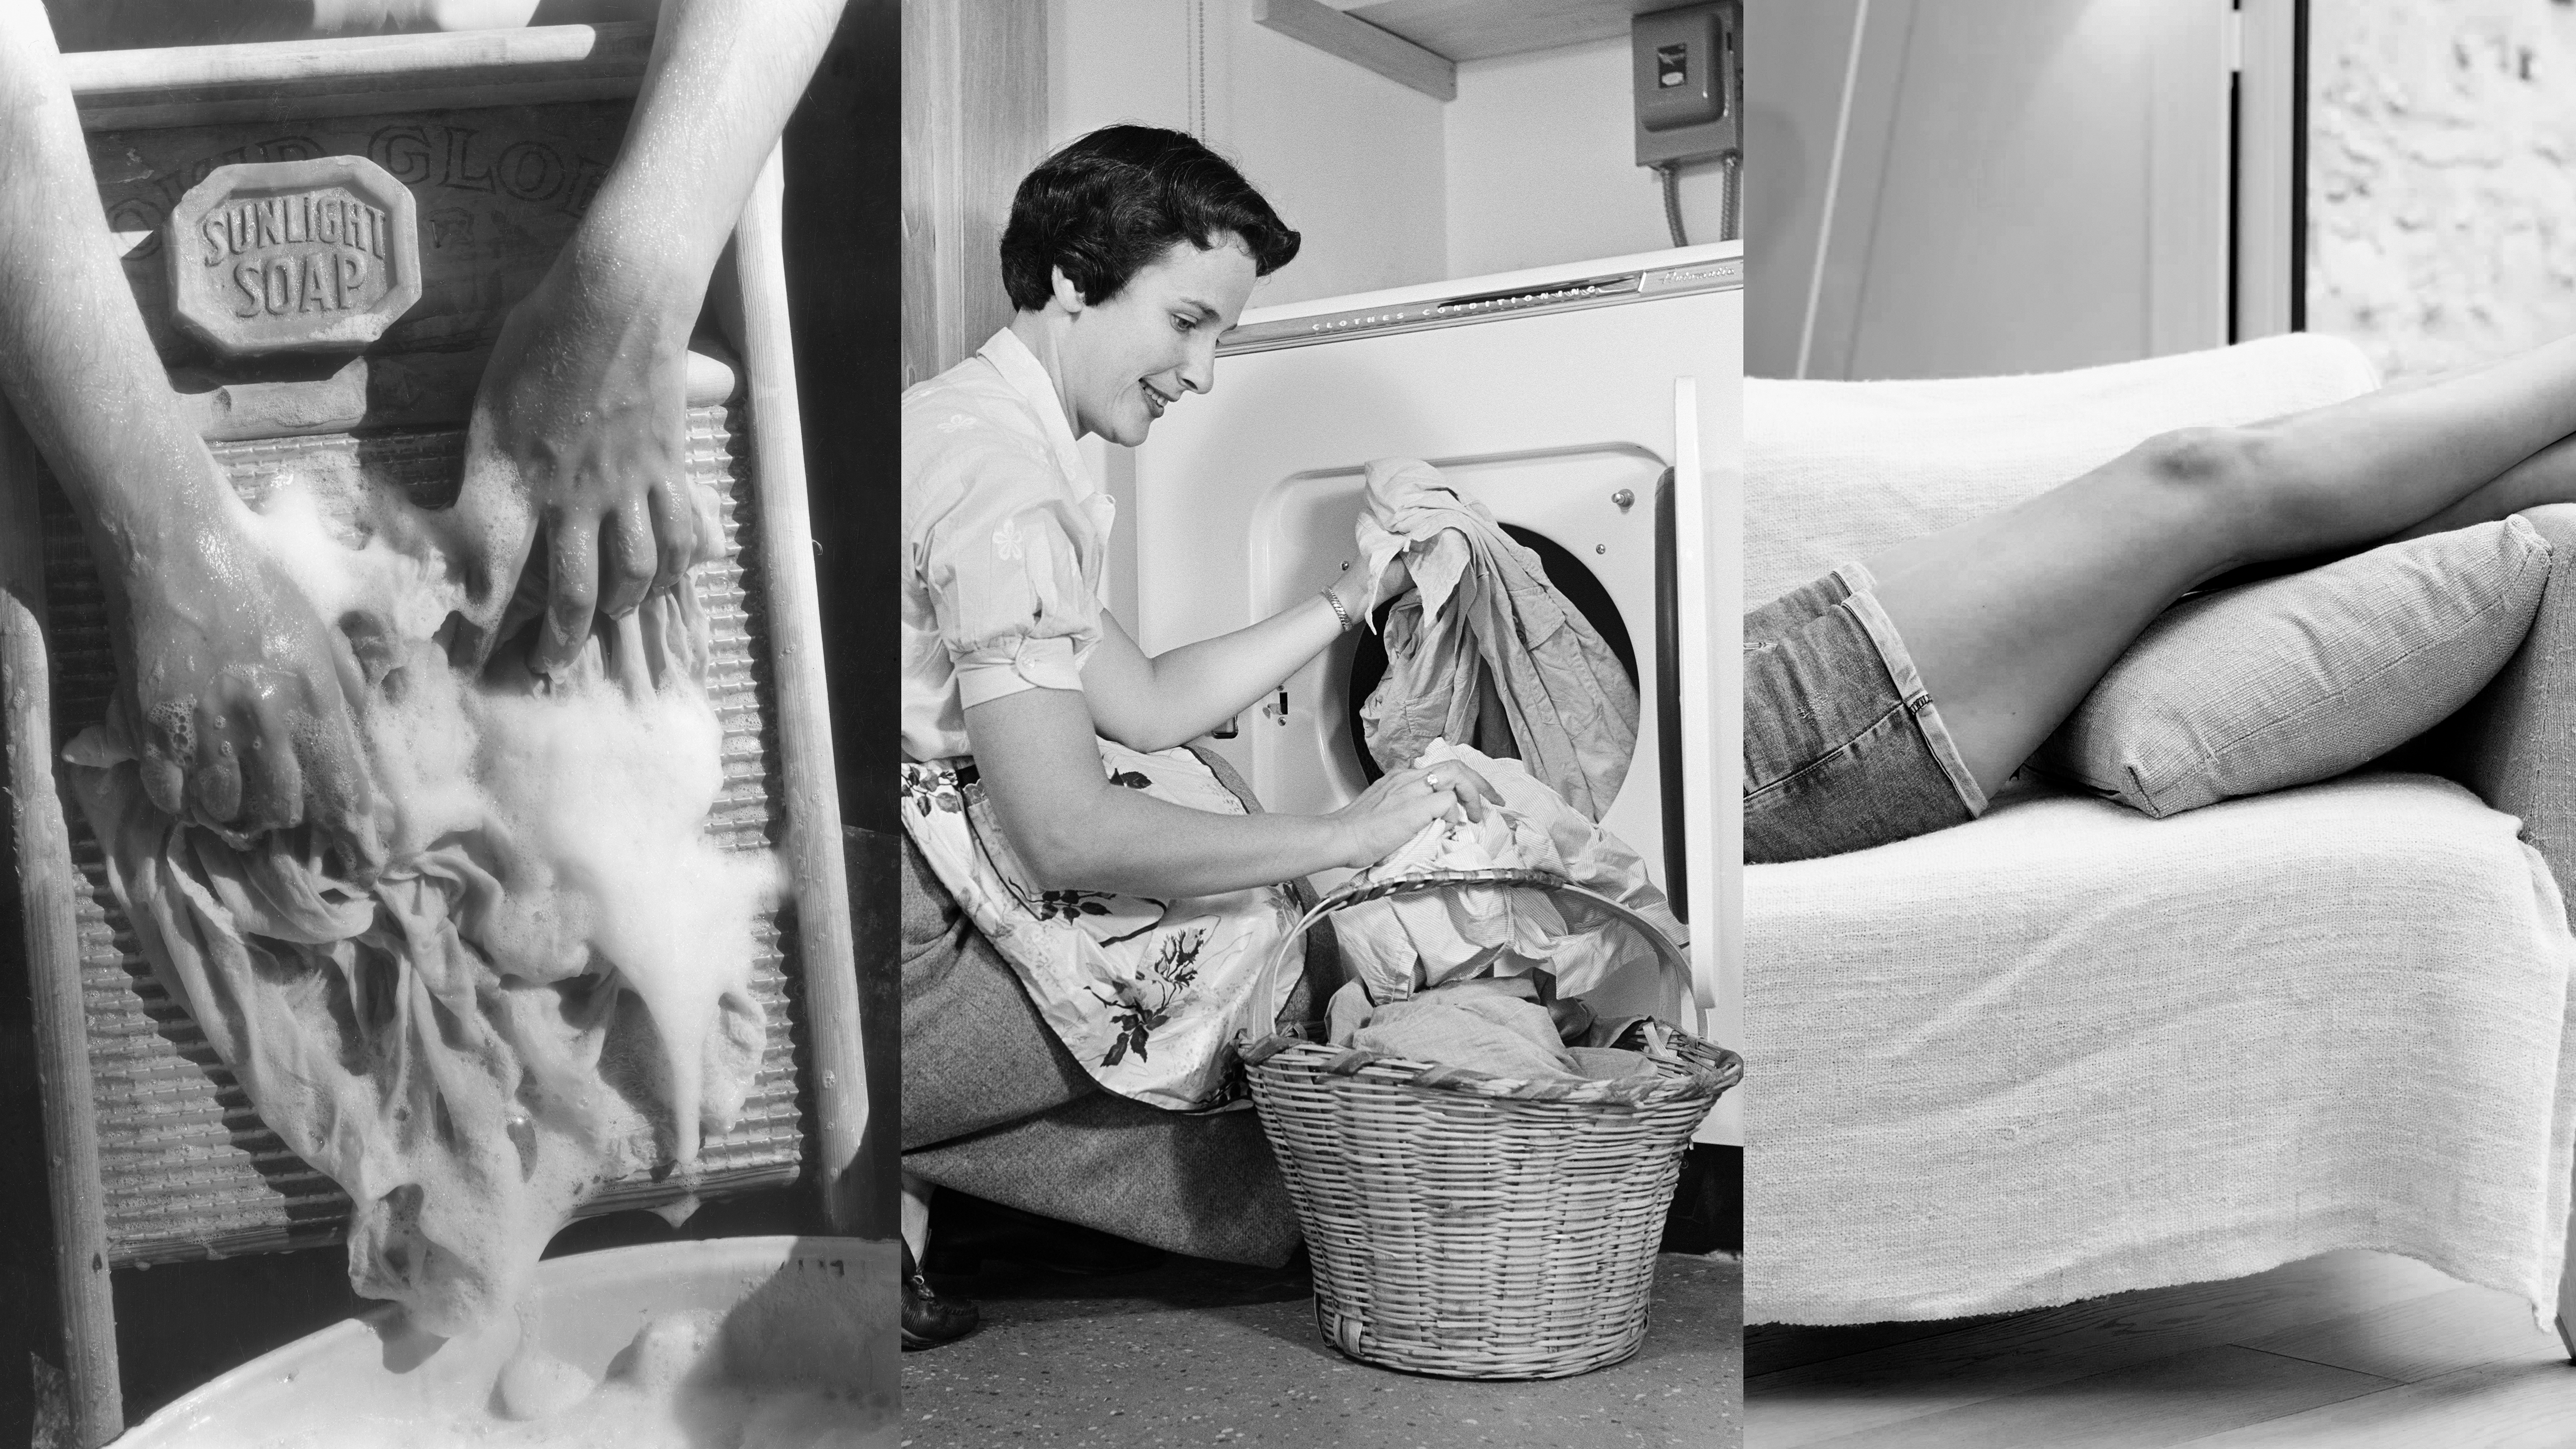 A photo-illustration showing various household chores